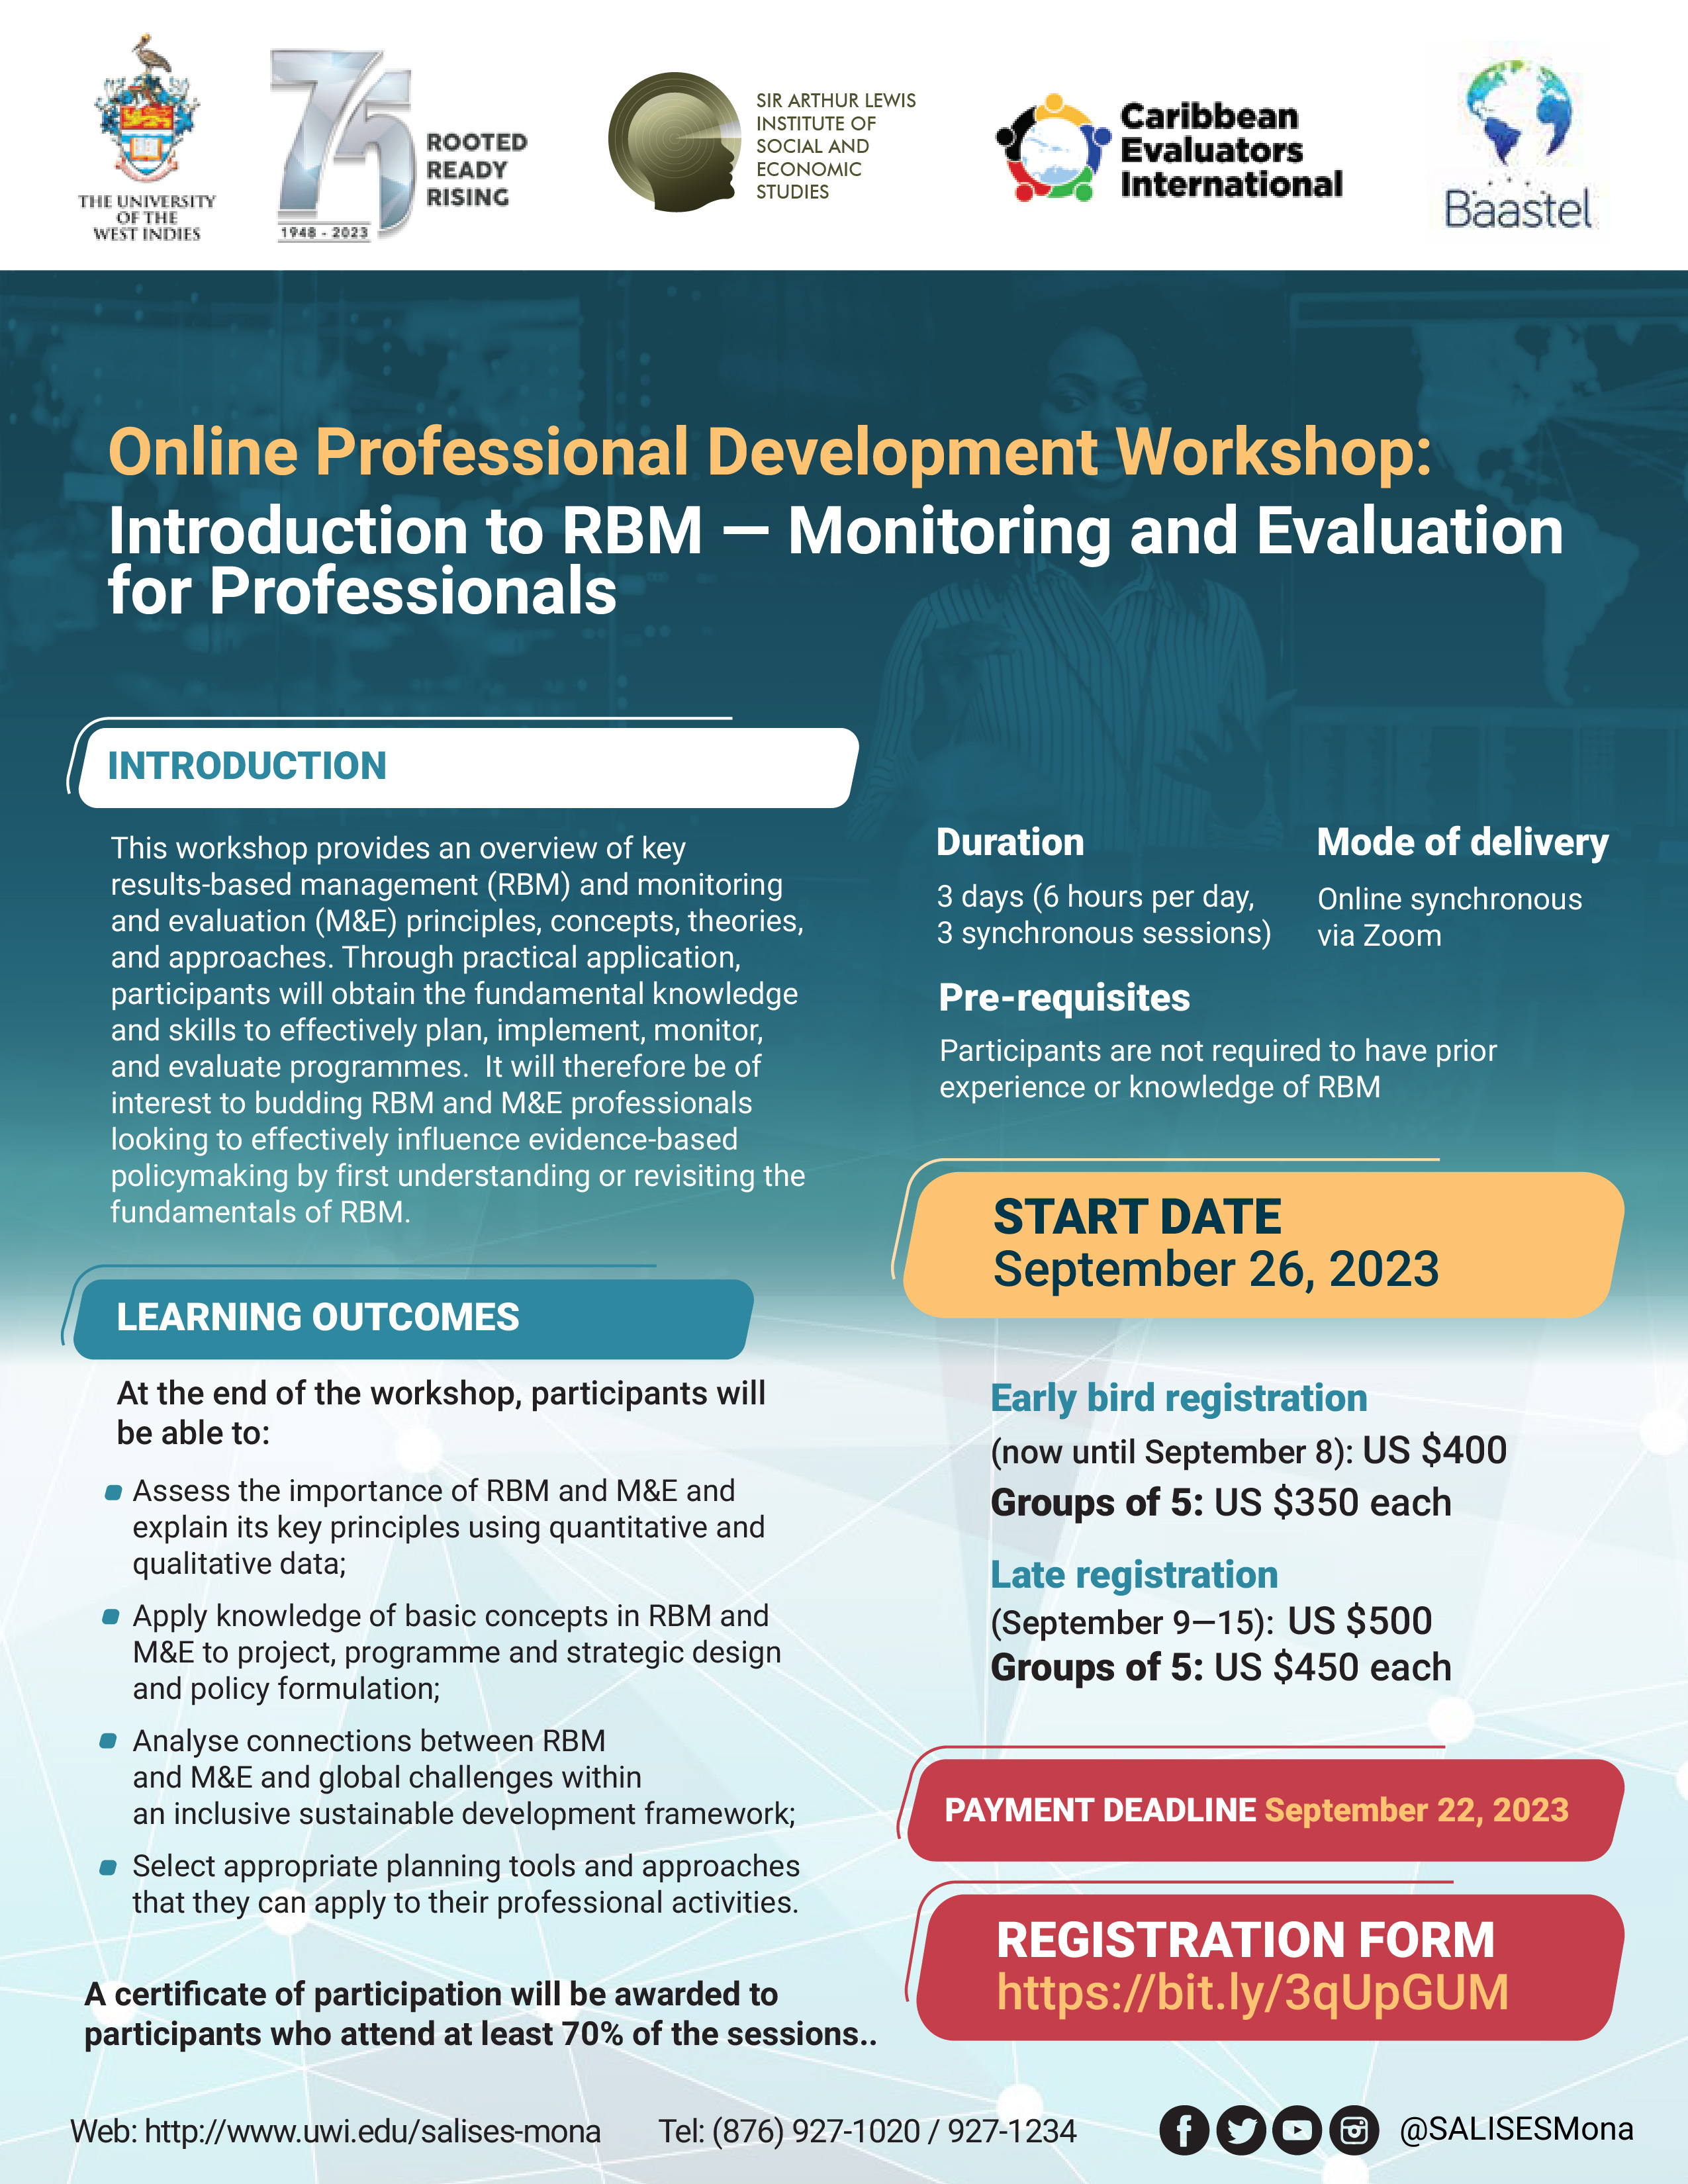 Online Professional Development Workshop: Introduction to RBM — Monitoring and Evaluation for Professionals